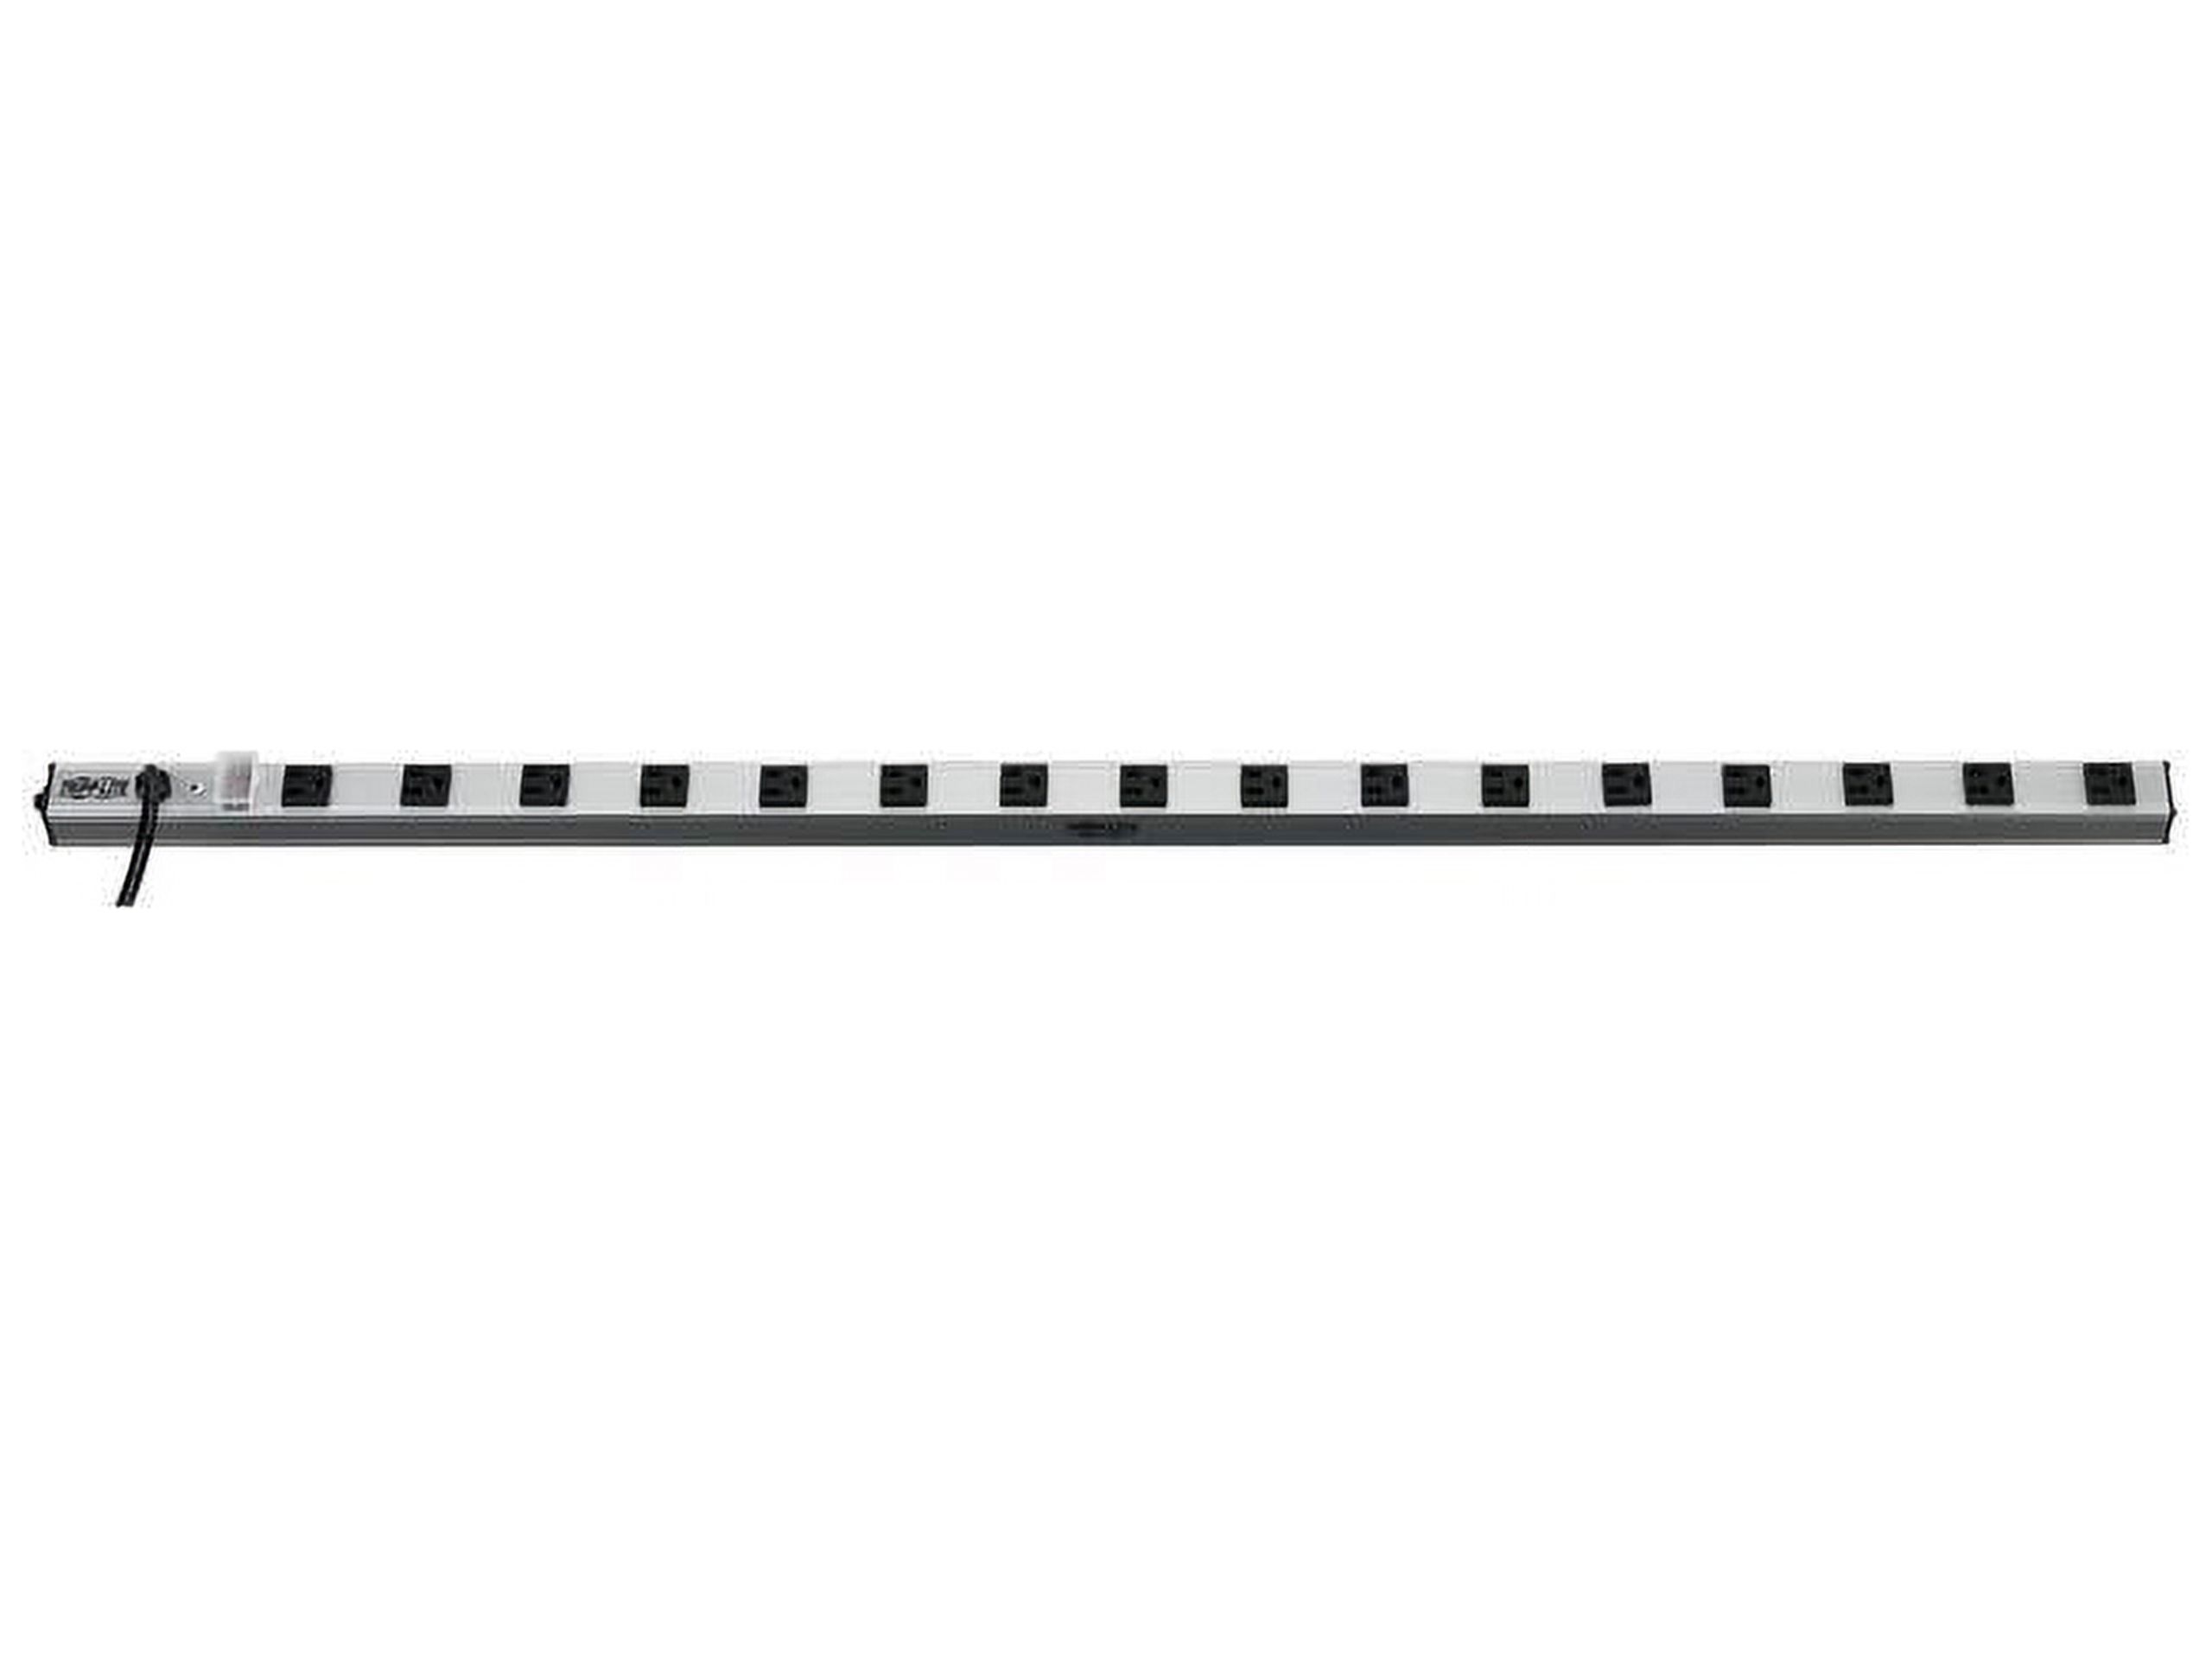 Tripp Lite 16 Outlet Power Strip, Long Cord 15 ft, 120V, 15A, 48 inch Vertical Housing, Metal (PS4816) - image 1 of 11